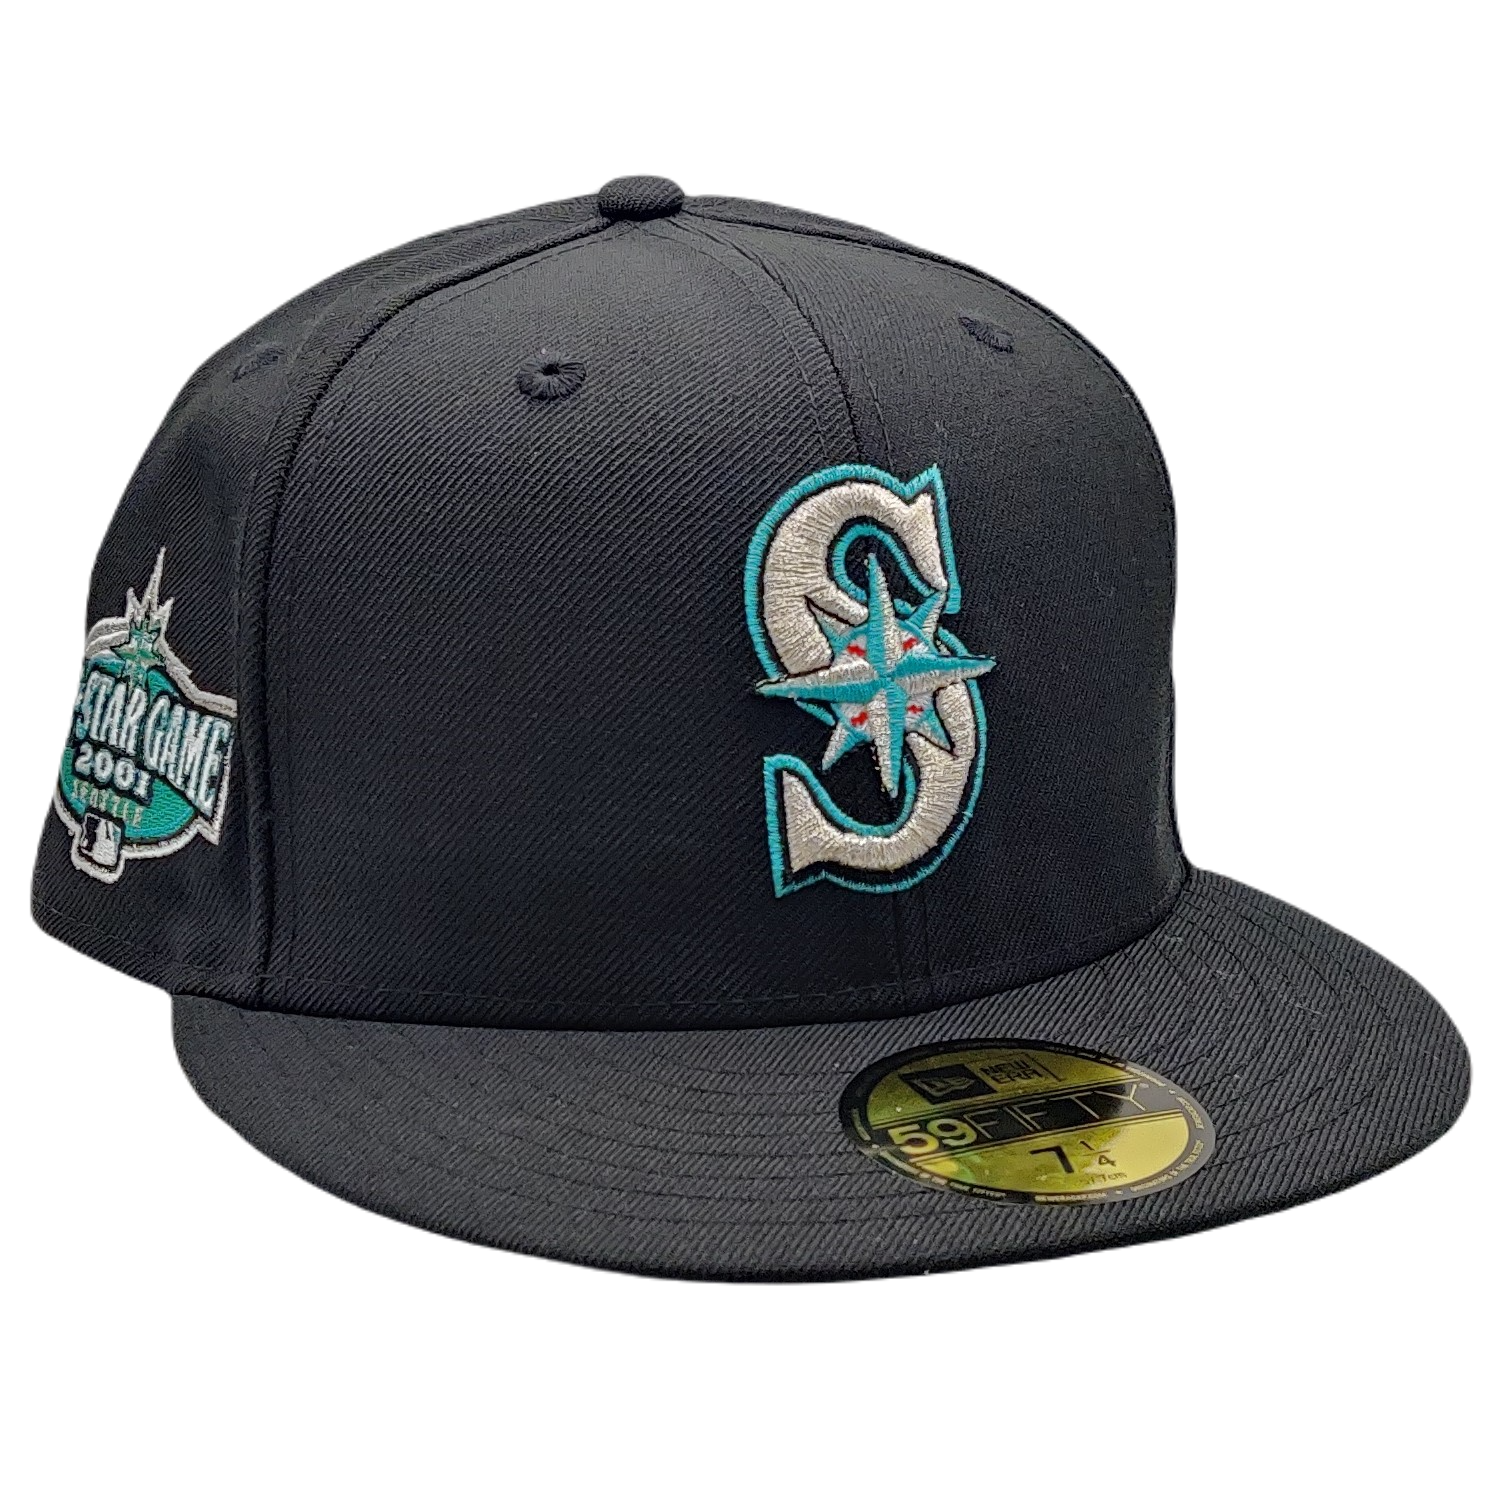 All-Star Game Fitted Hats, All-Star Game Baseball Caps